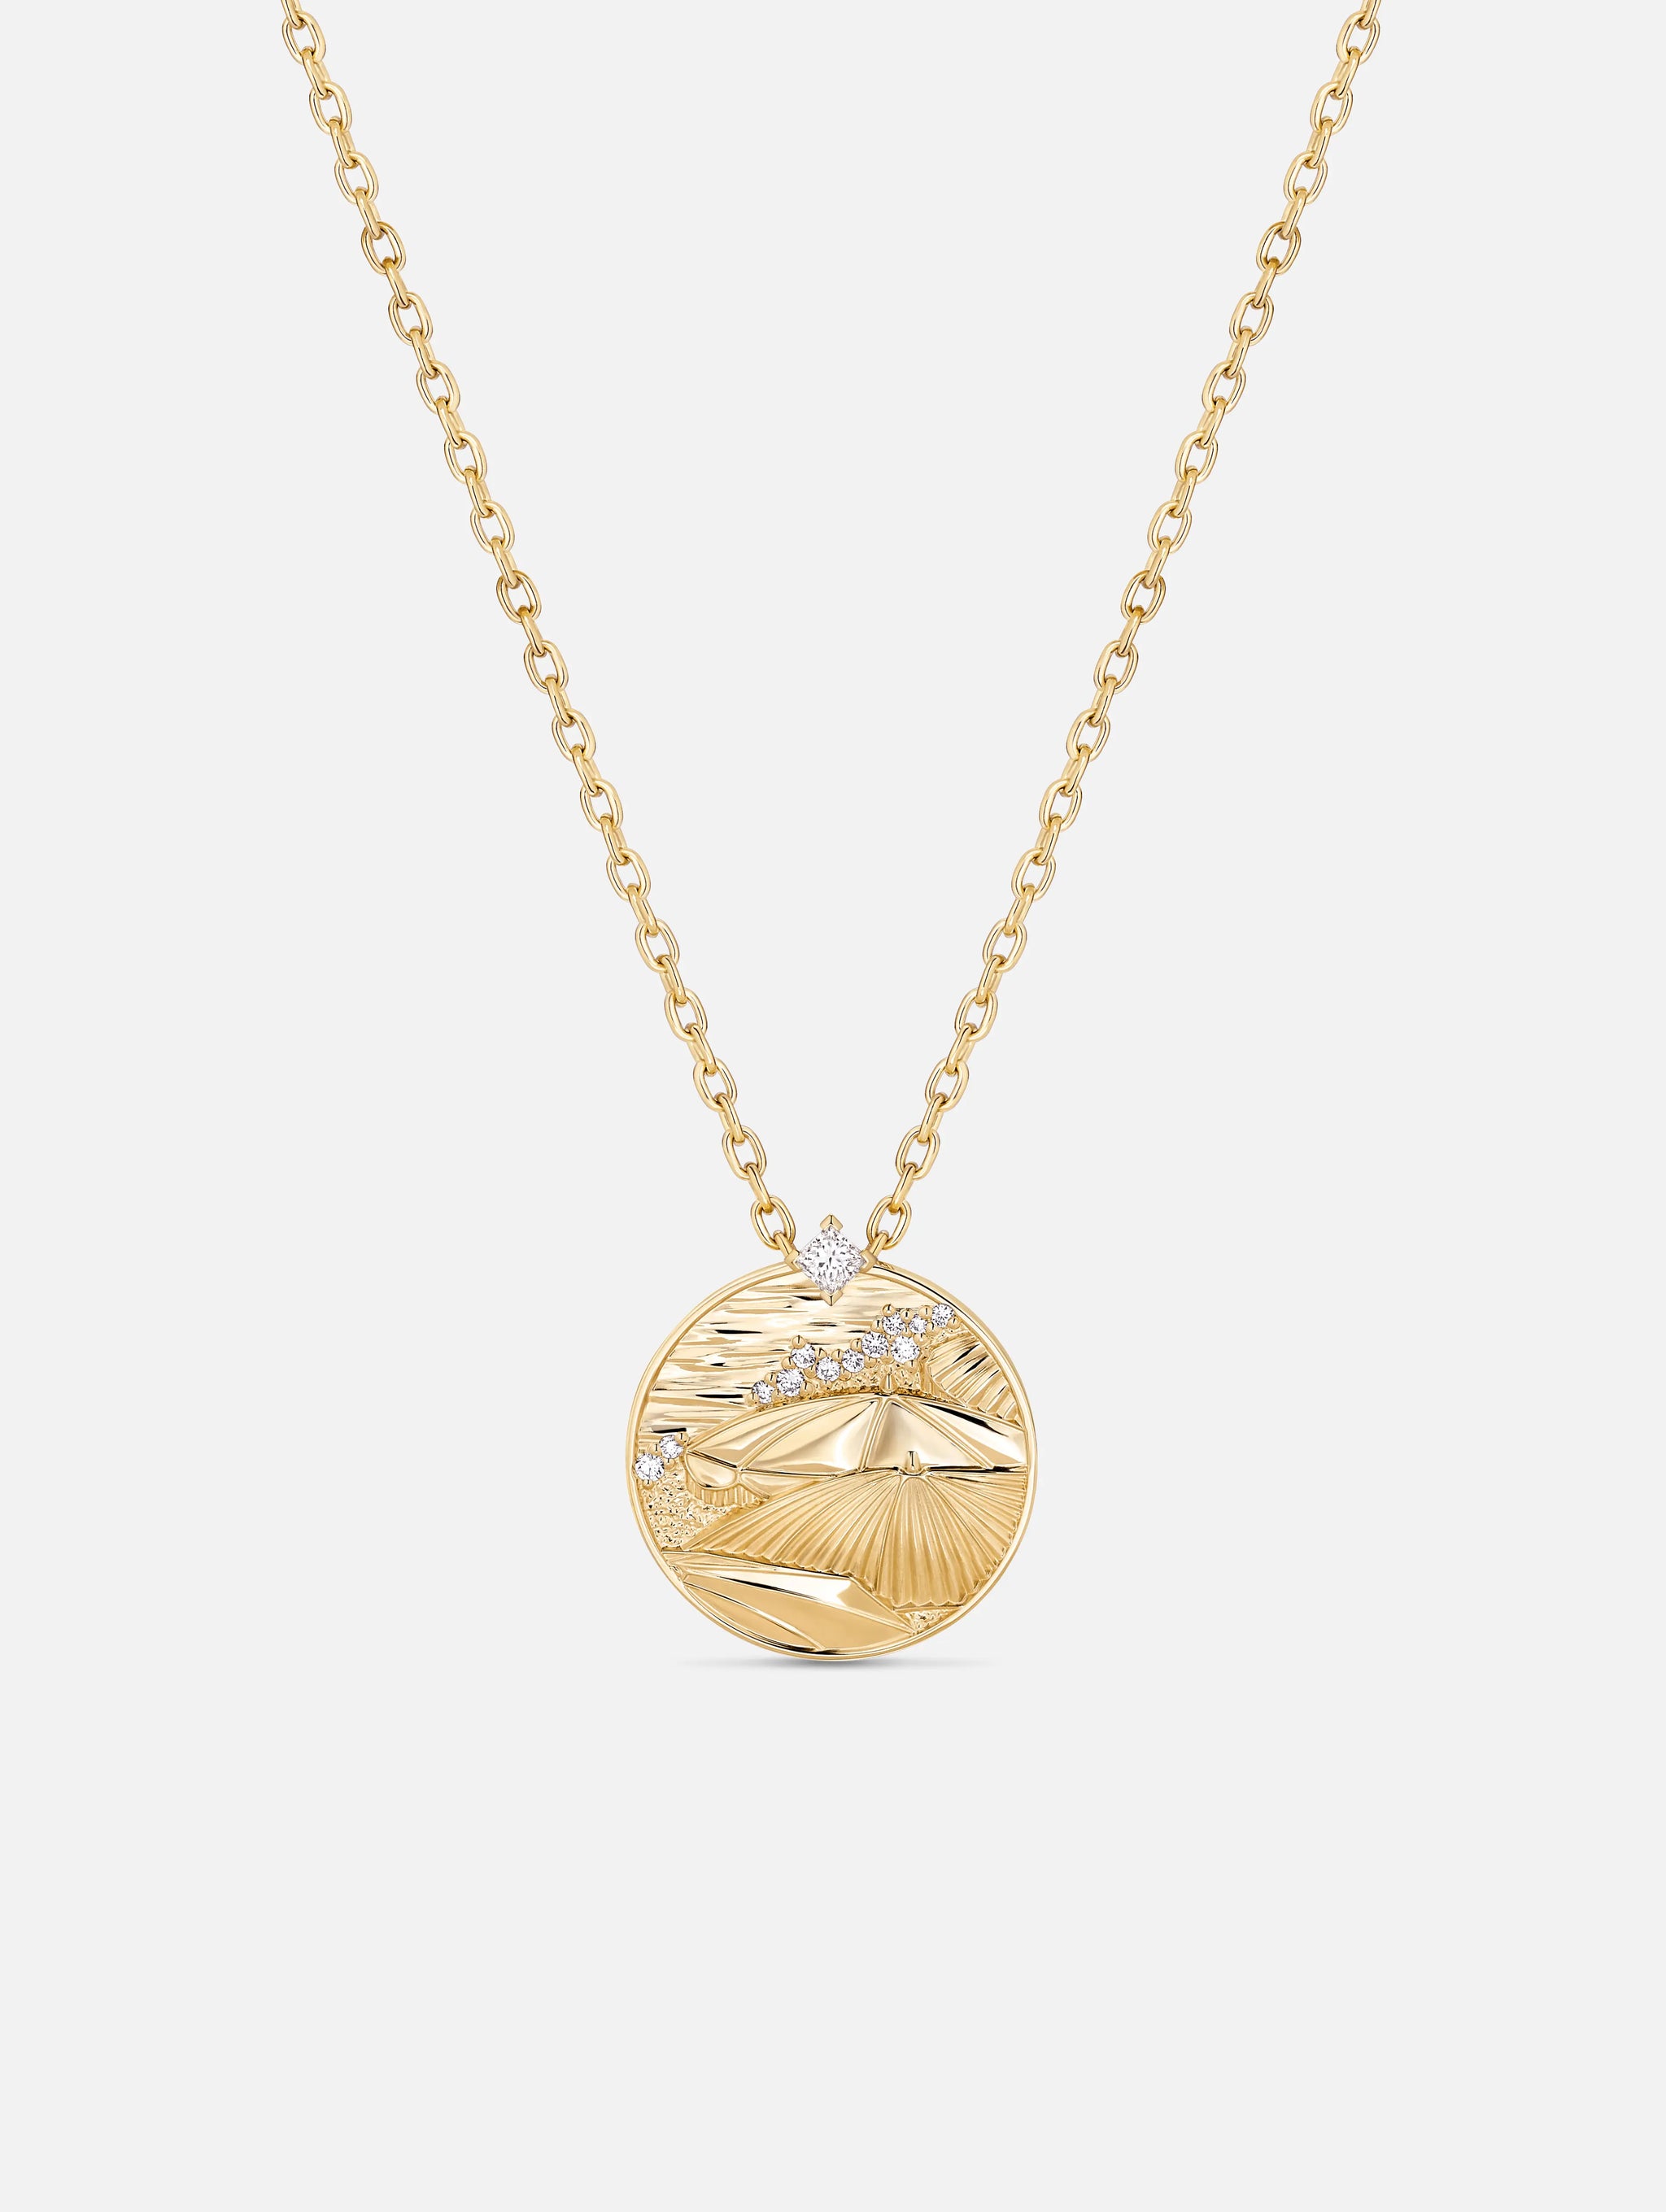 Cannes Medallion in Yellow Gold - 1 - Nouvel Heritage